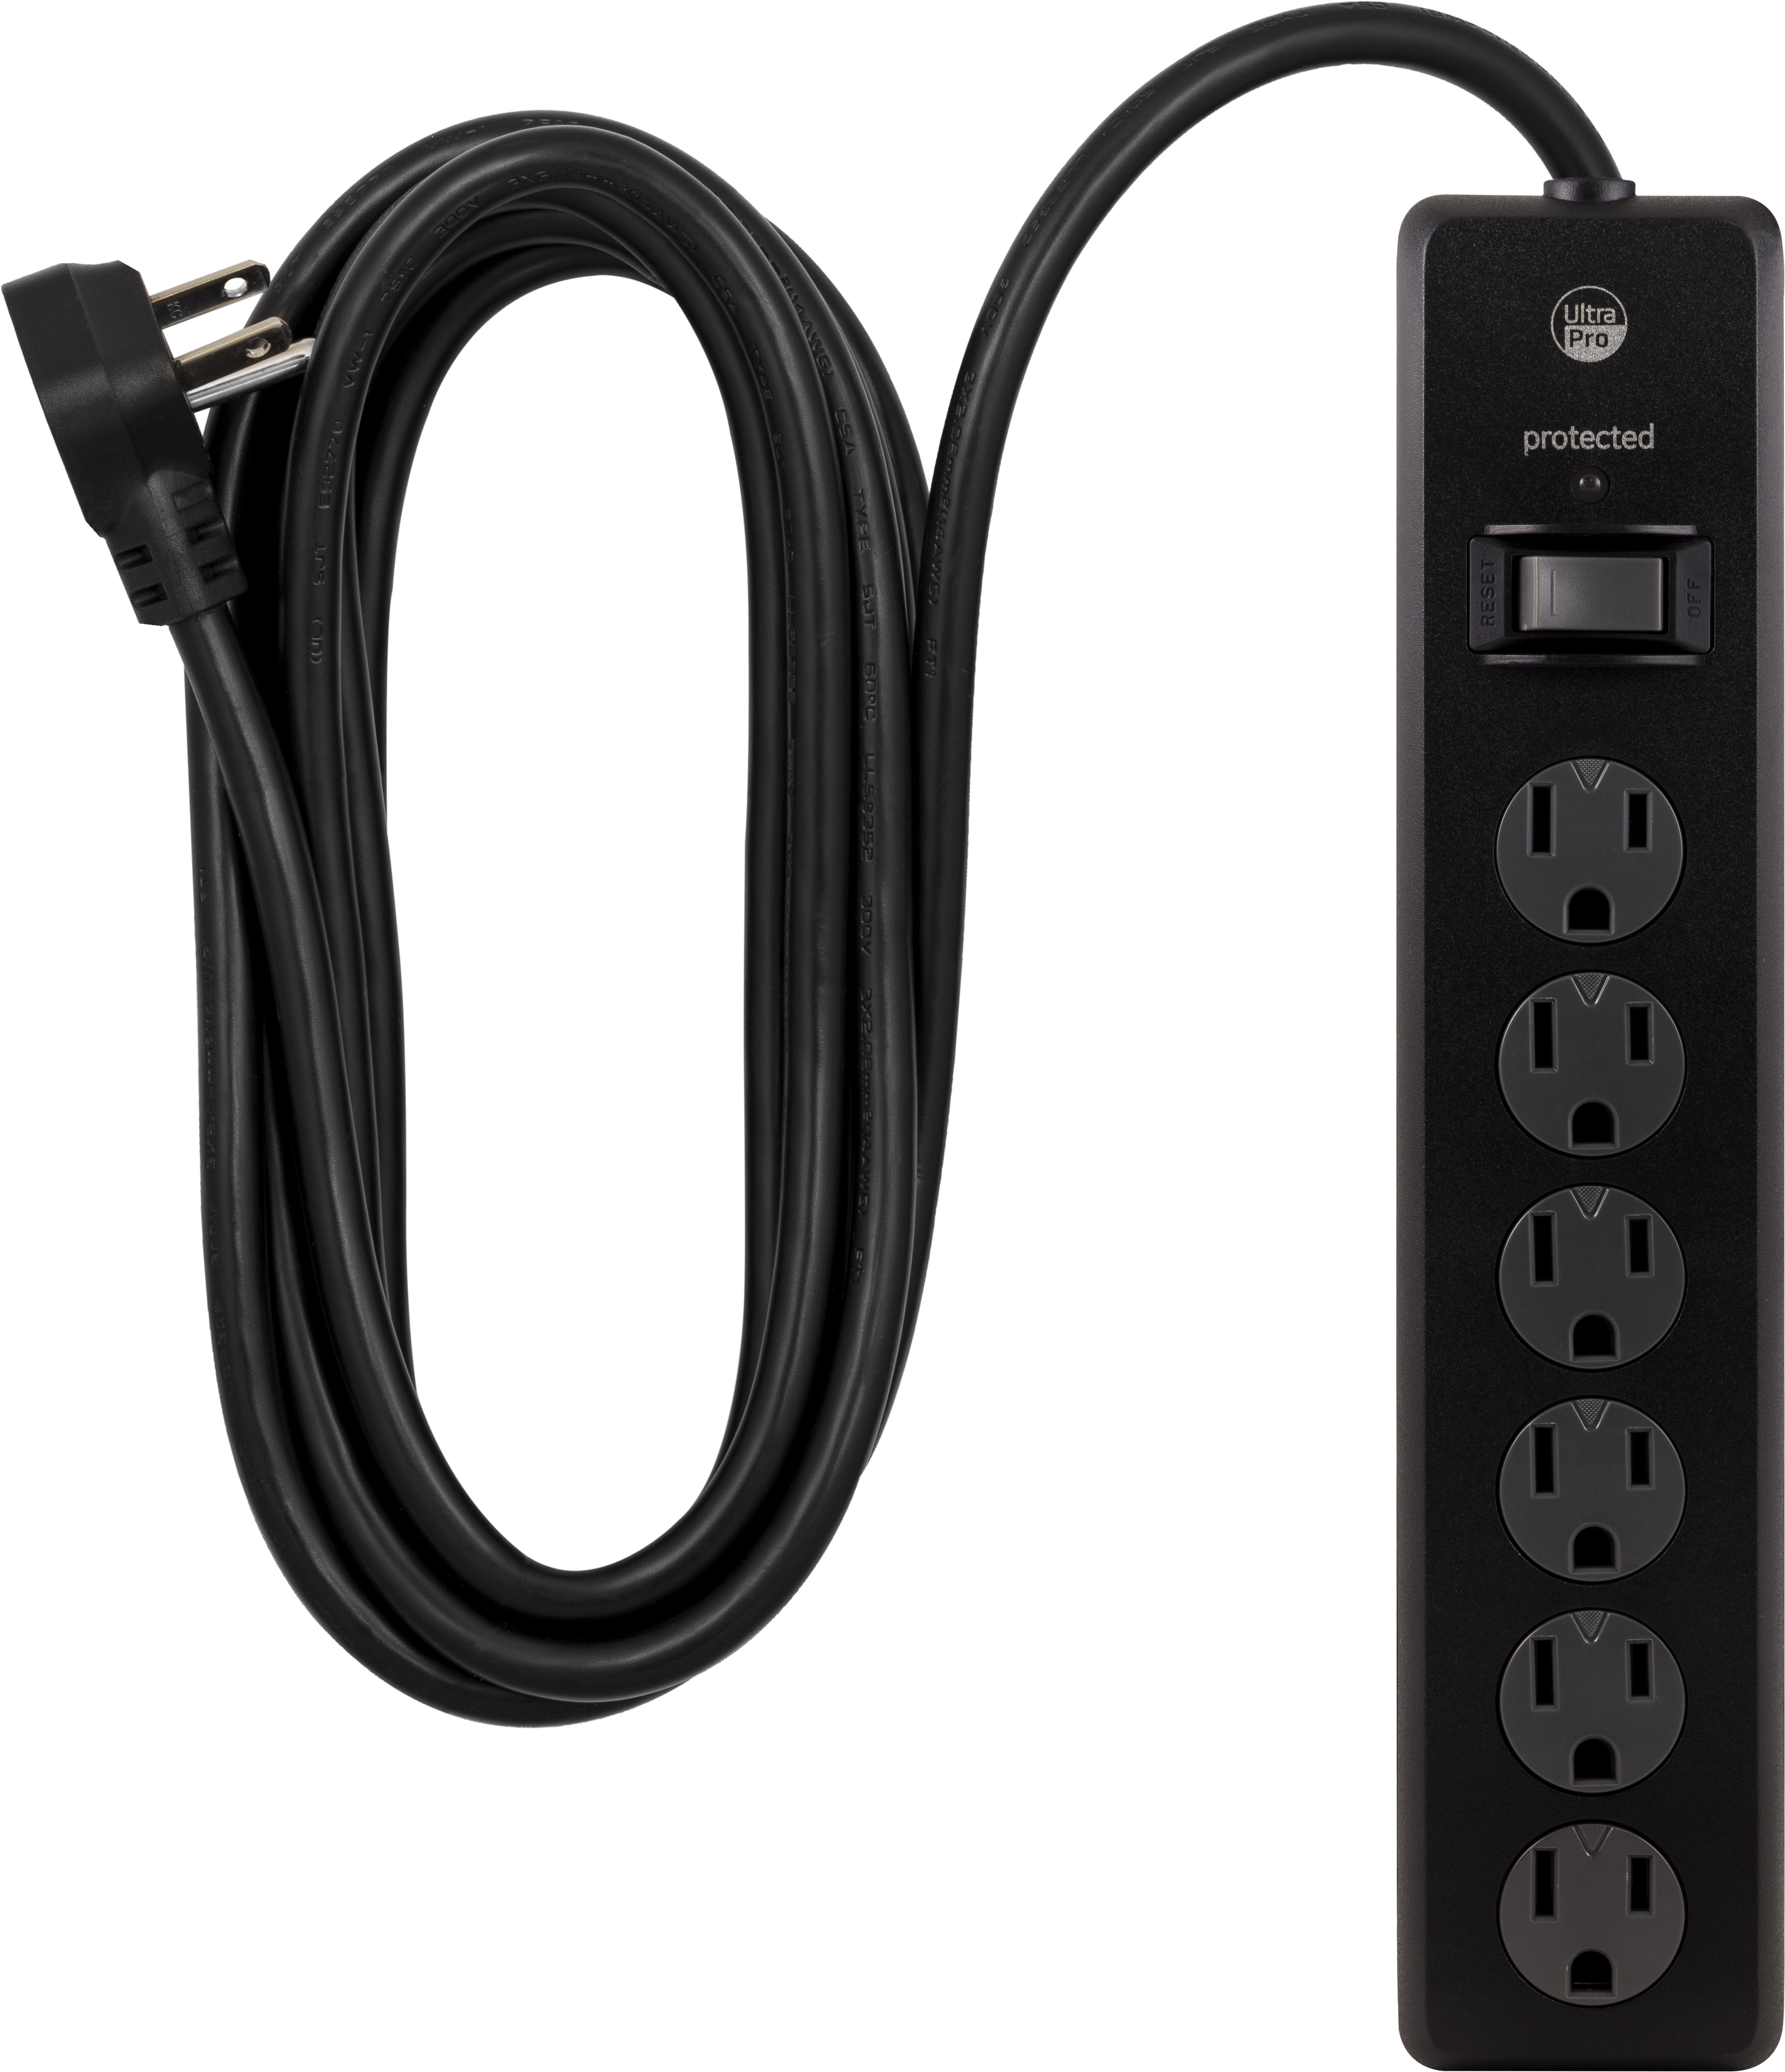 Switch 4 Pack Maxxima 6 Outlet Power Strip Surge Protector 300 Joules 2FT Cord